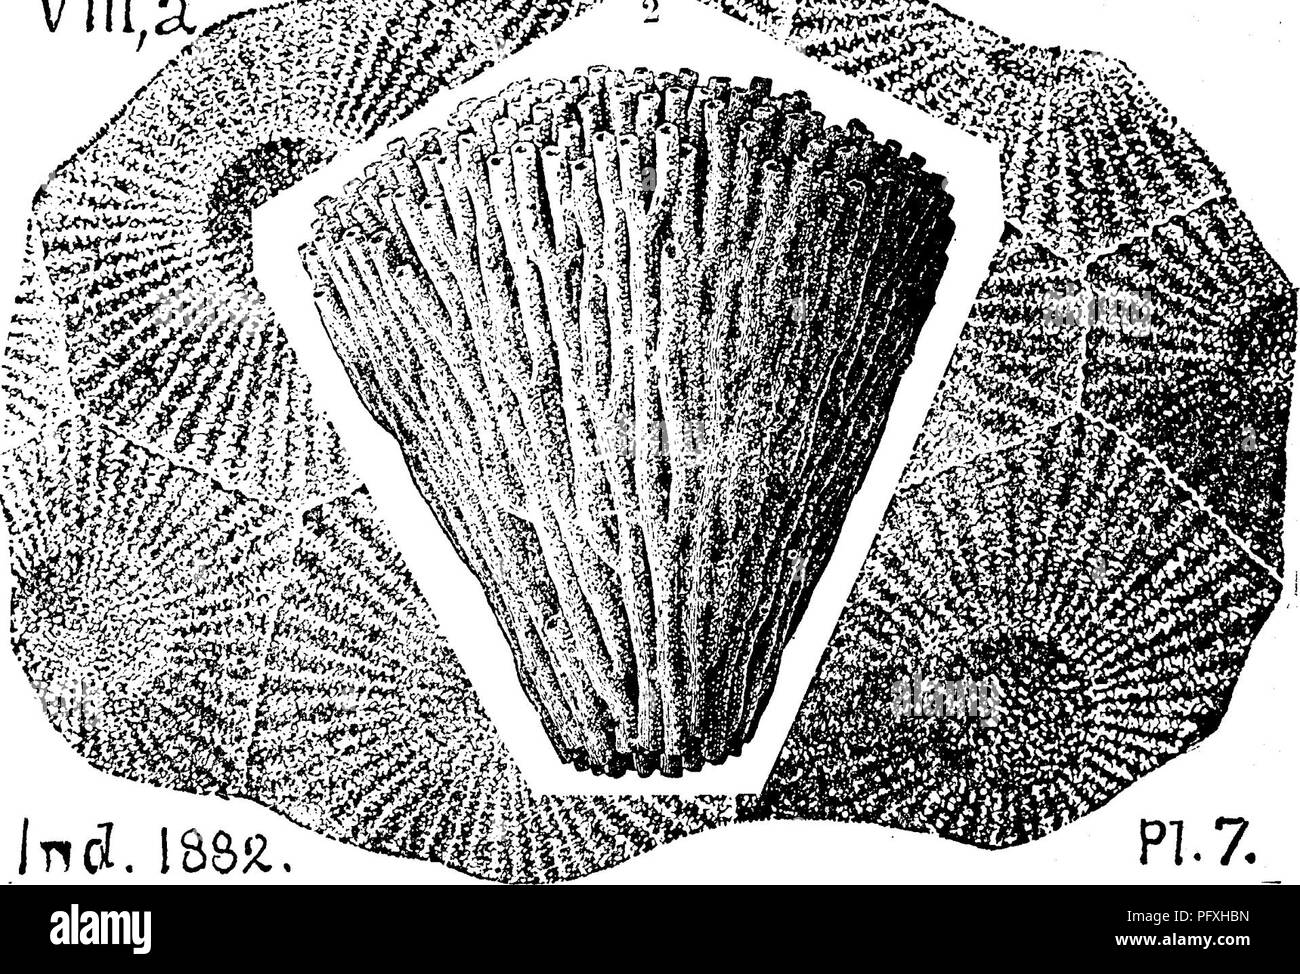 . A dictionary of the fossils of Pennsylvania and neighboring states named in the reports and catalogues of the survey ... Paleontology. 27.^ Heli. another fine figure; here omitted.]—Erie Co., N. Y. and Scott and Clark counties, Ind.— VIIIa. Heliophyllum coalitum, Rominger. (Foss. Corals, page VII! ^ ZZw^^^^^^^^^^'. 108, 1876.) Collett's Indiana Report of 1882, page 259, plate 7, fig. 2, a simple specimen; fig. 3, upper surface of a group (doubtfully identified with fig. 2).—In drift from VIII a. Heliophyllum compactum. (Hall, 35 An. Rt. 1882.) |////.5;«H^tffS^^^^ Collett's Indiana Kt. 1882,  Stock Photo